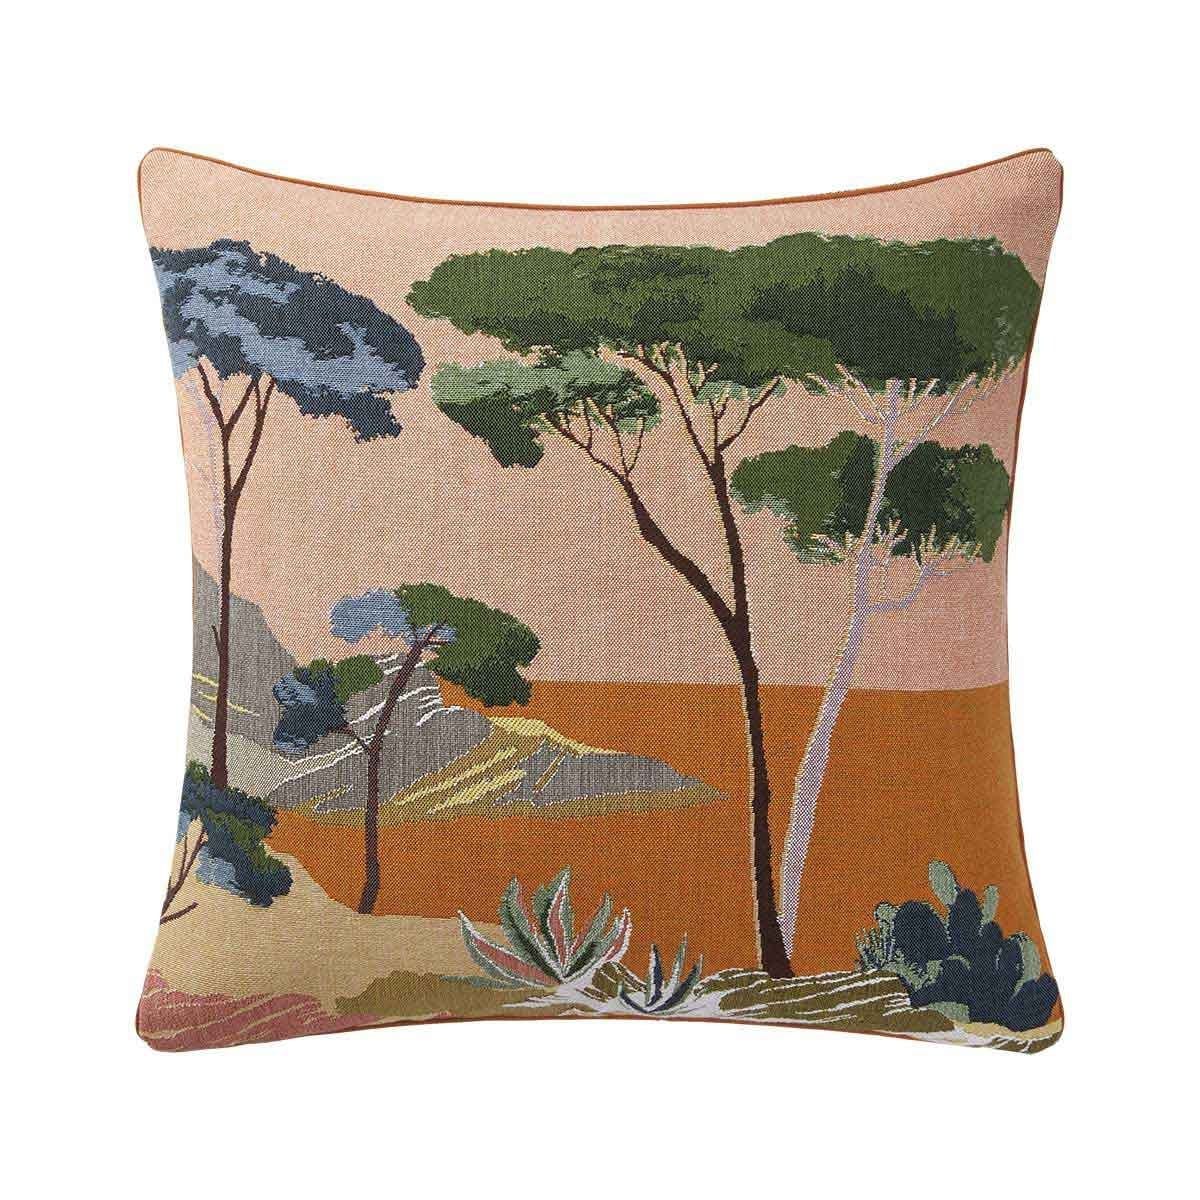 Decorative Pillows Iosis Cigales Decorative Pillow by Yves Delorme PecheP Yves Delorme